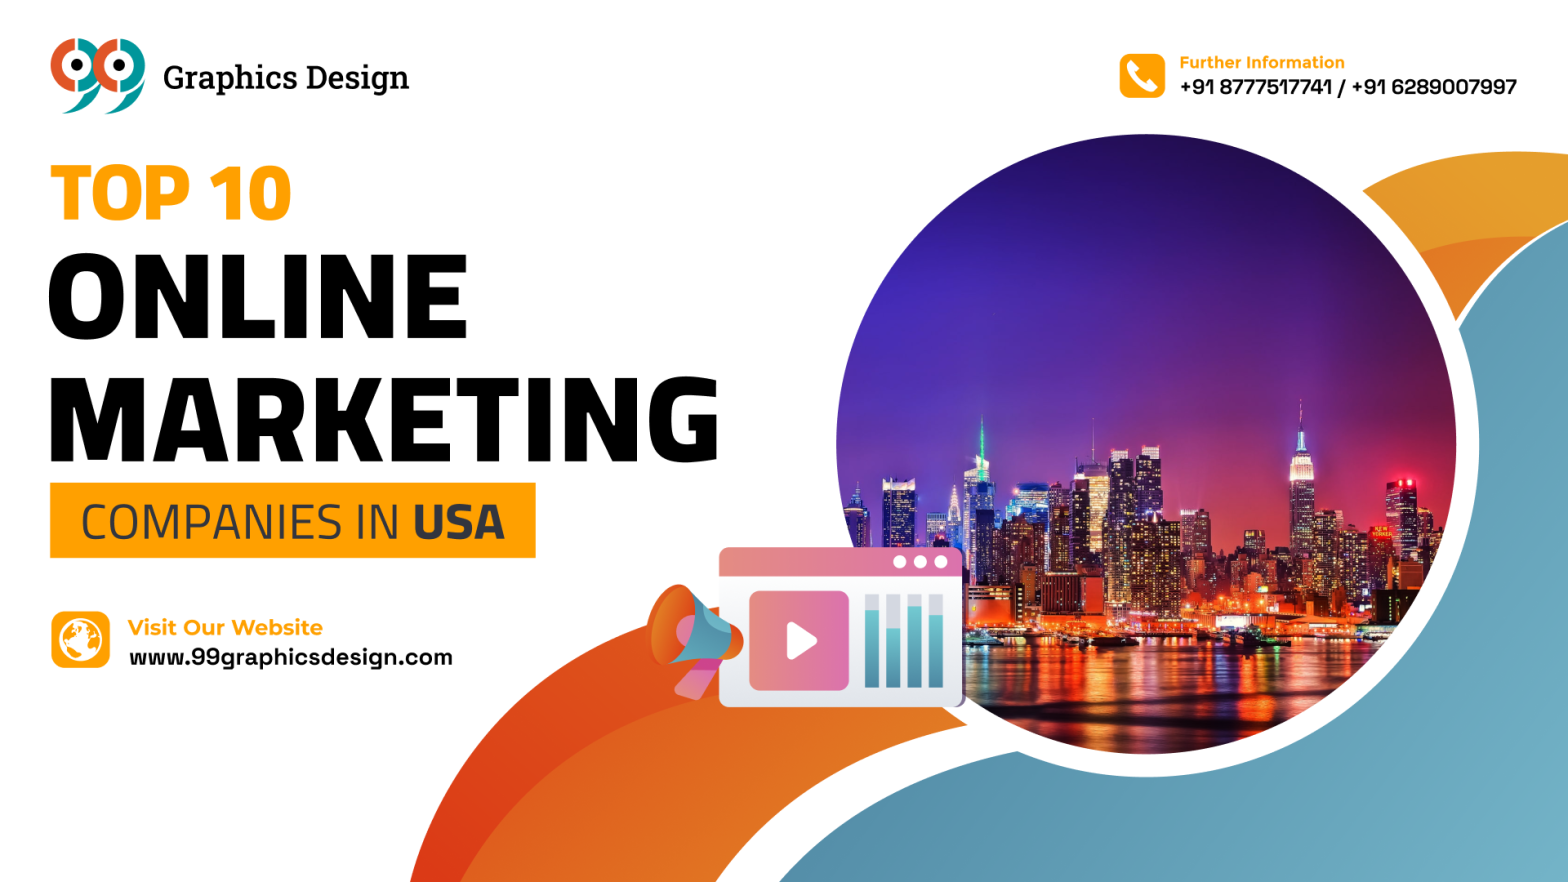 Online Marketing Companies in USA